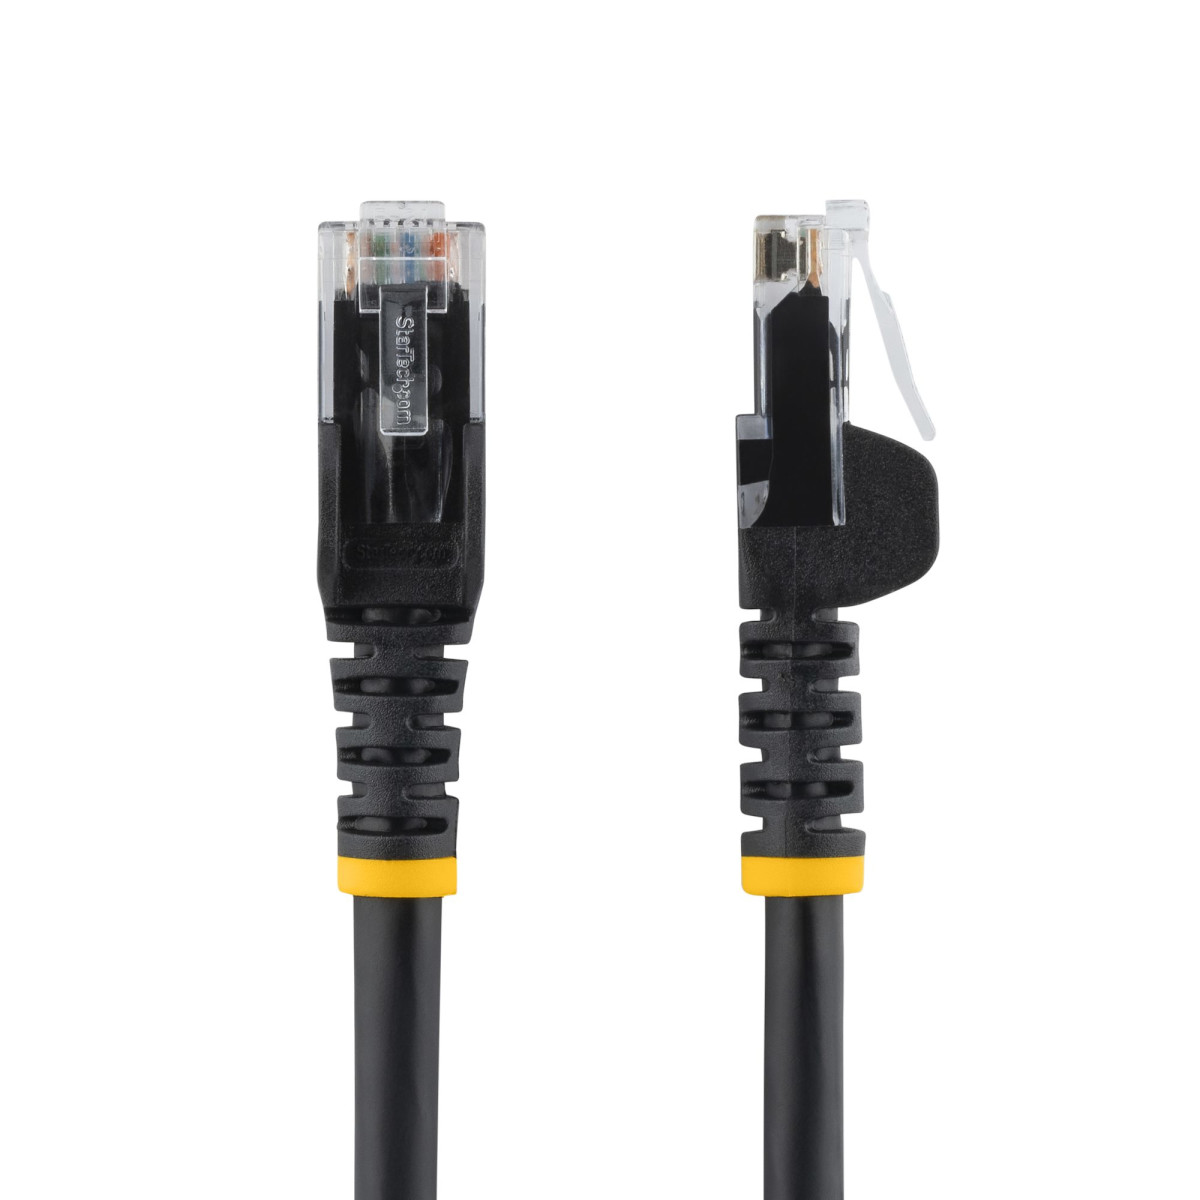 10m Black Snagless Cat5e Patch Cable